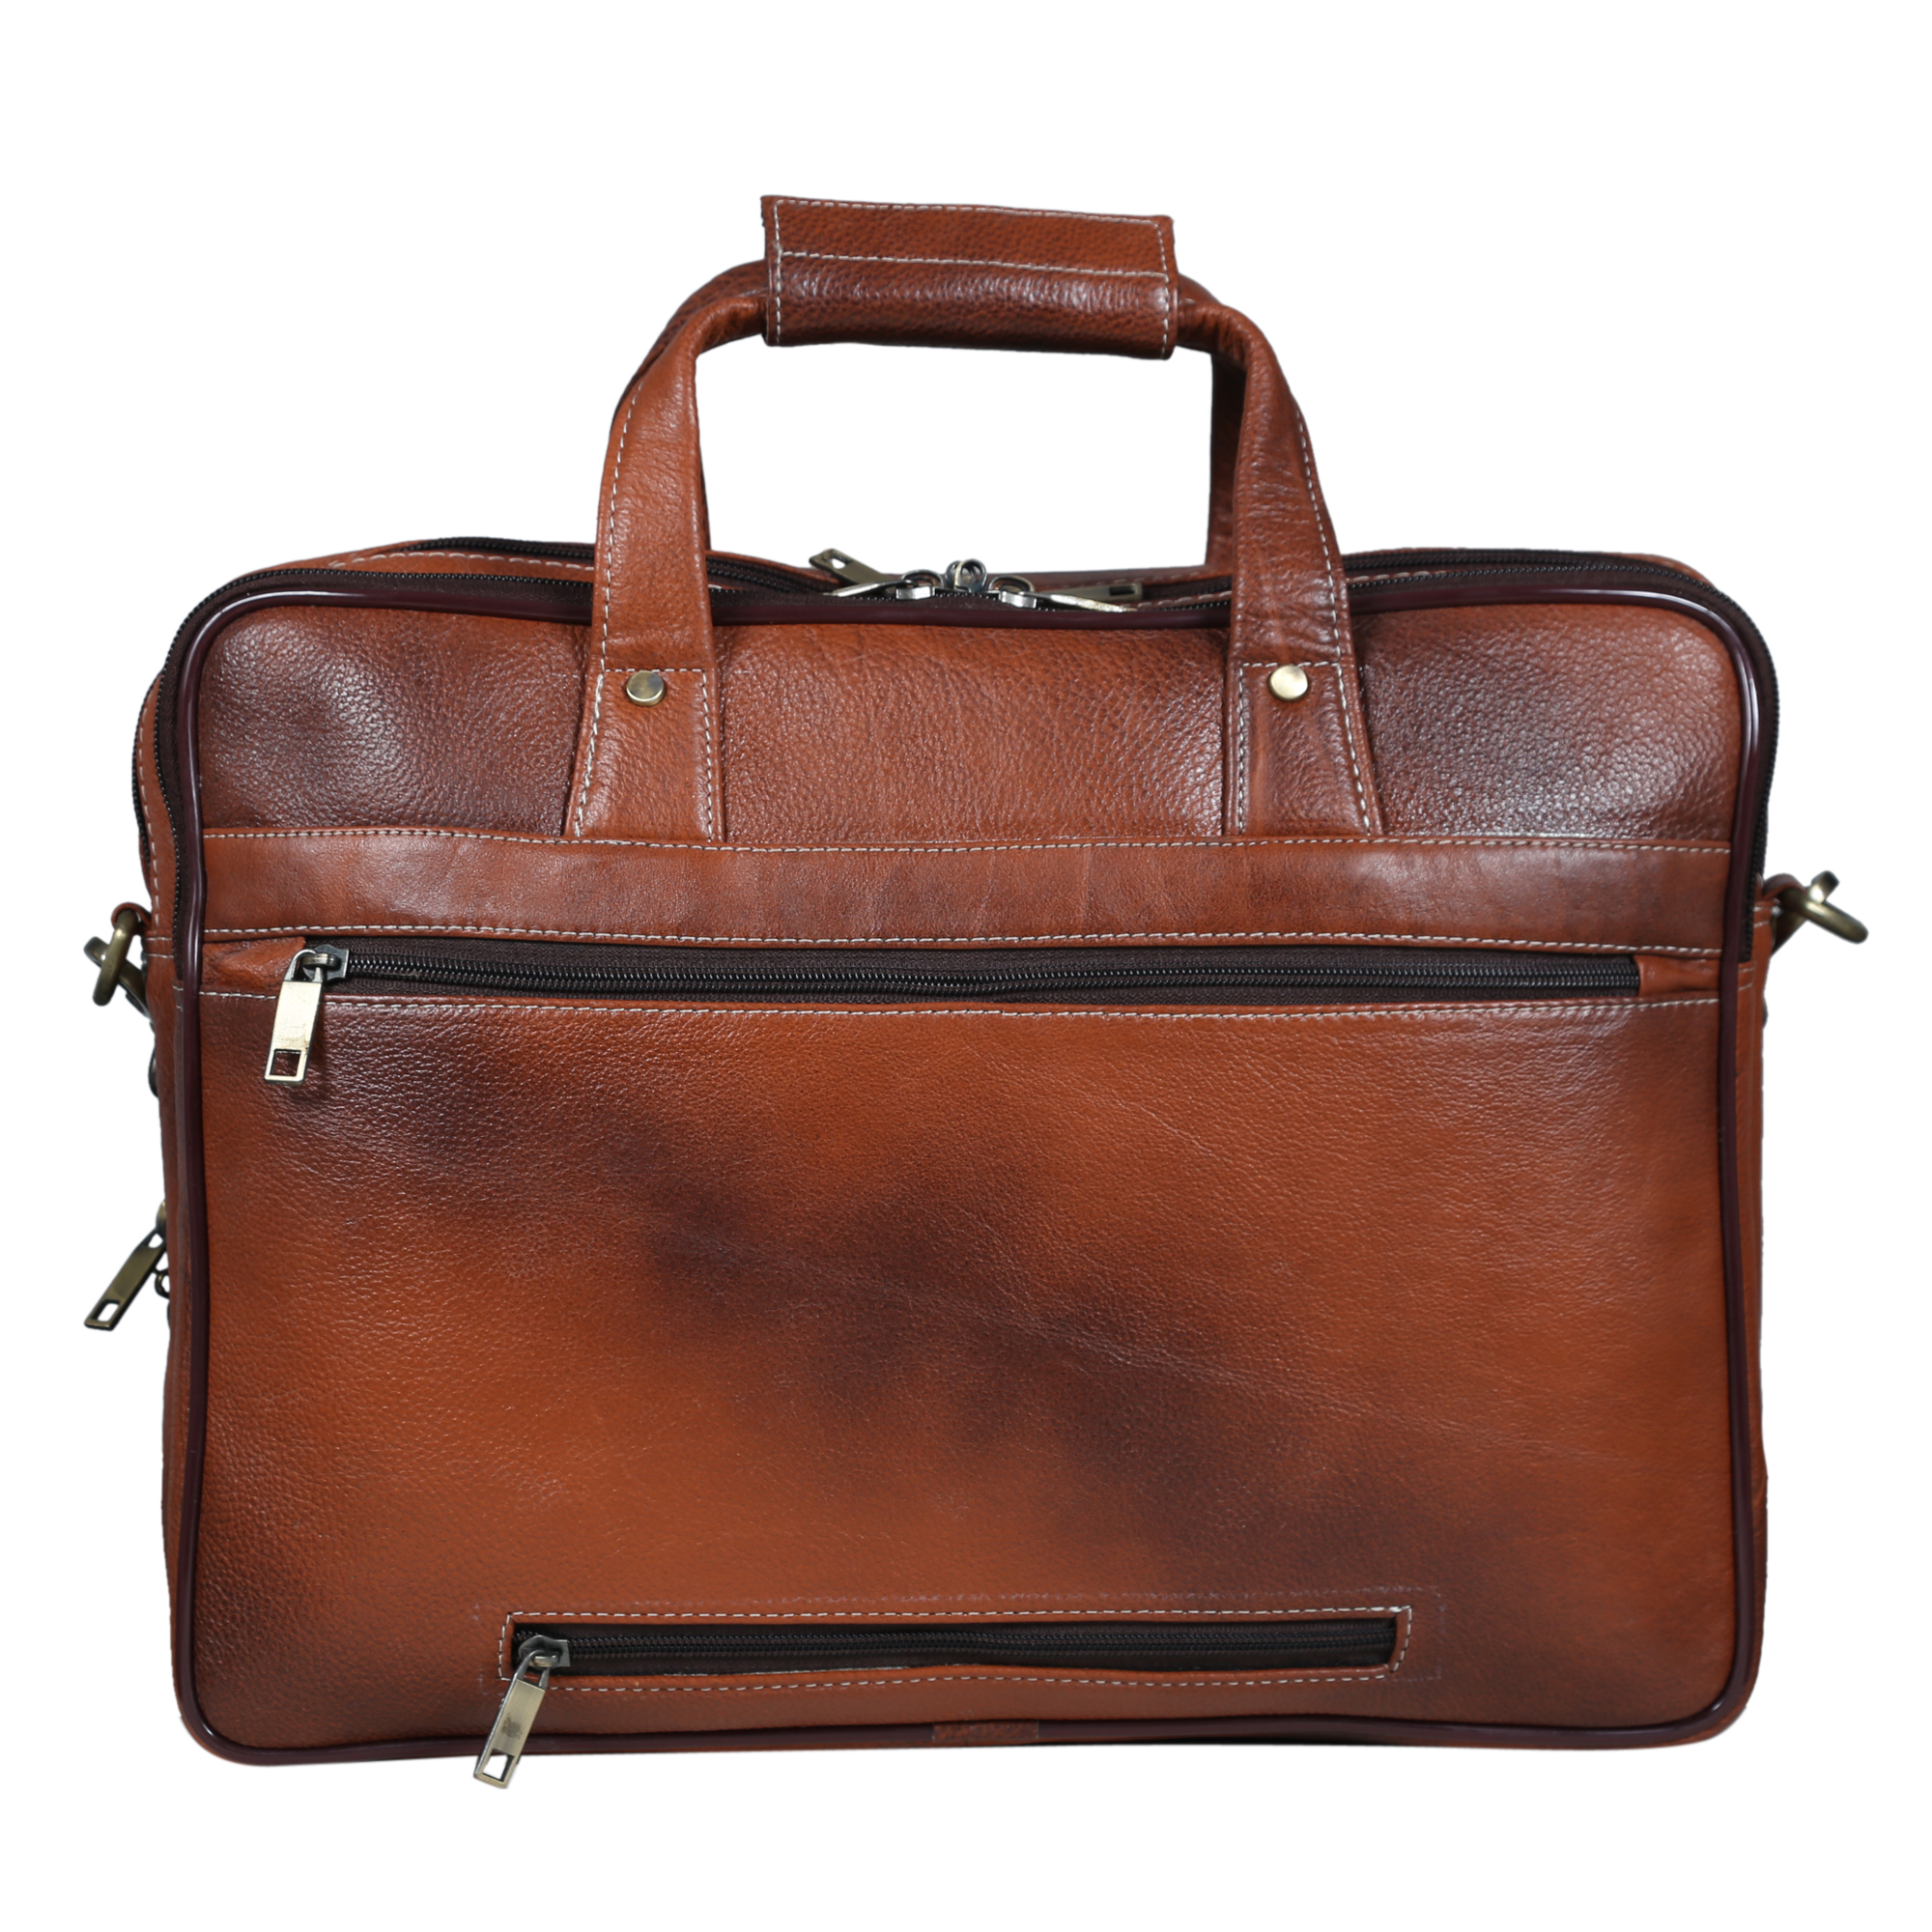 Corporate Laptop Leather Bag Bulk Deal at Marketplace for Leather Goods